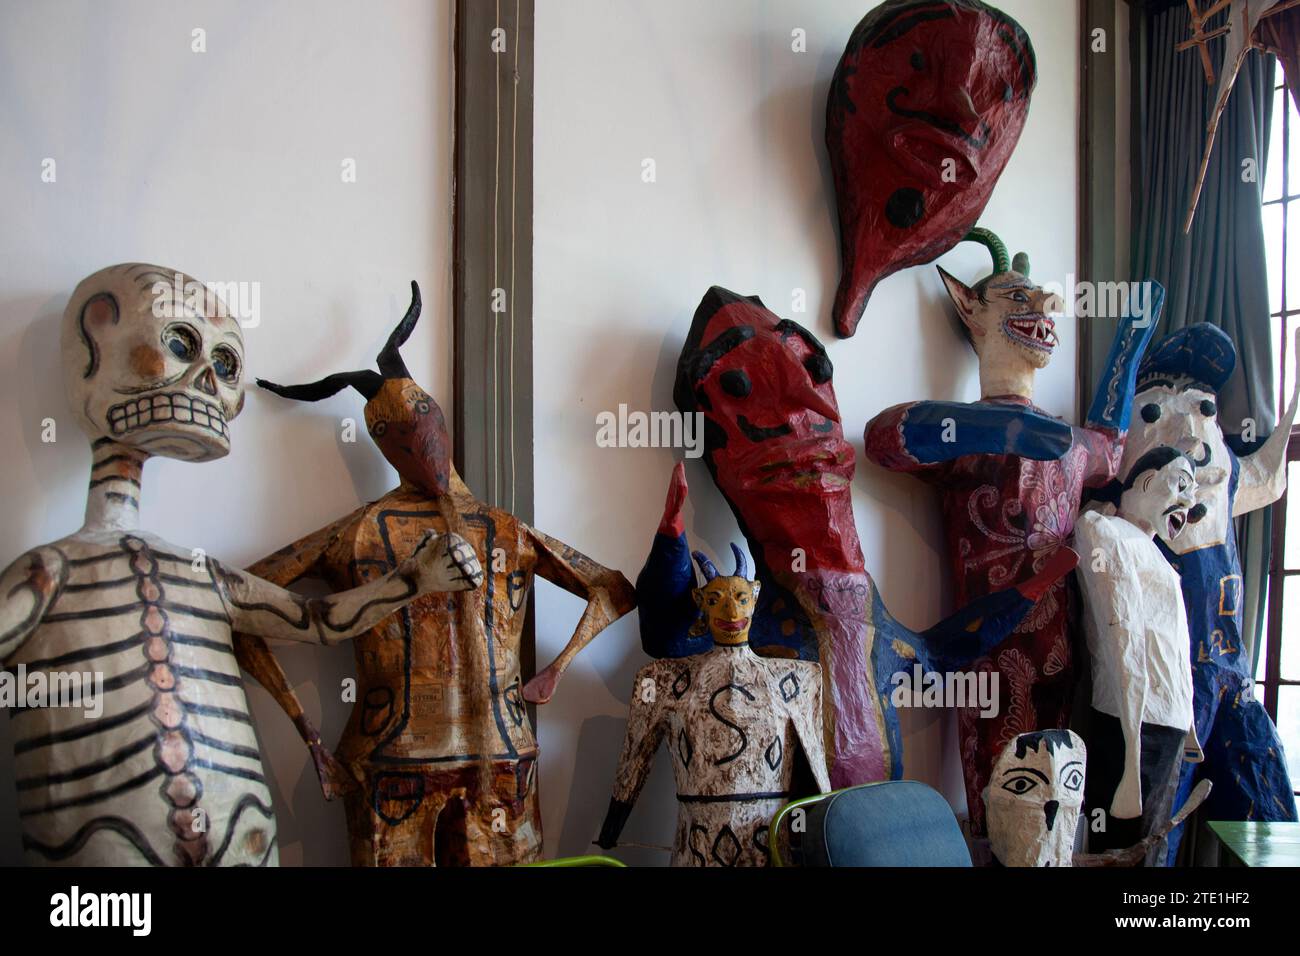 Papier Mache Figures  at Museo Casa; Estudio, Diego Rivera and Frida Kahlo Studio and House in Mexico City, Mexico Stock Photo